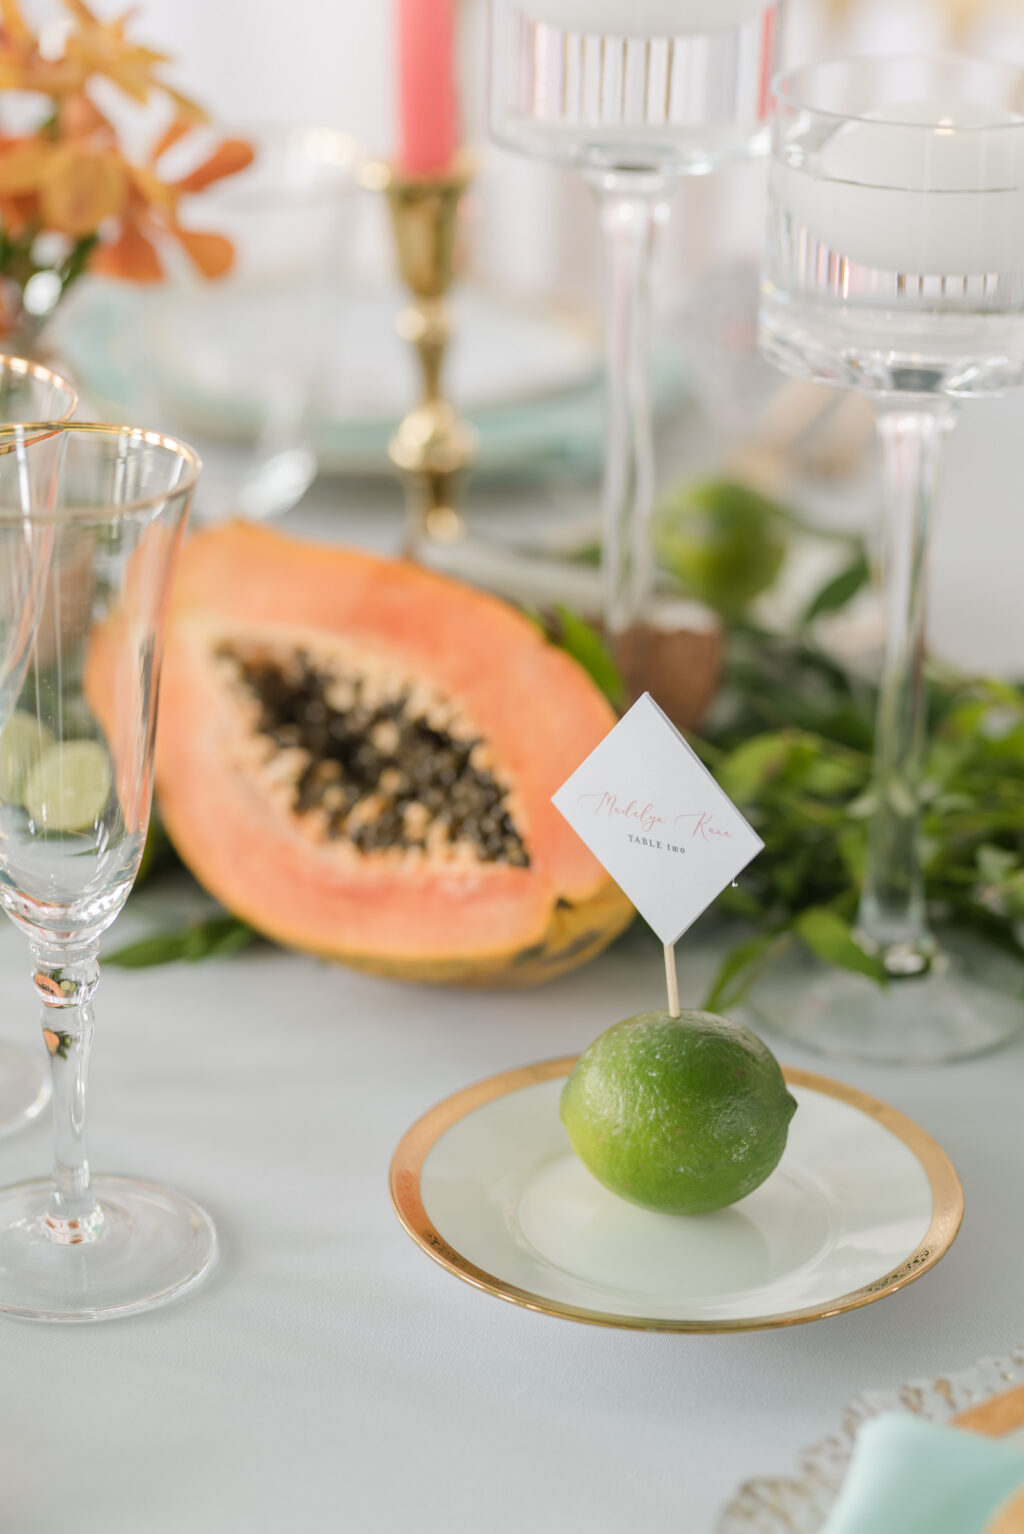 Tropical Wedding Reception Decor, Gold Rimmed Plate with Lime Fruit and Diamond Shaped Place Card, Papaya Fruit Centerpiece | Tampa Bay Wedding Planner Eventfull Weddings | Tabletop Wedding Rentals A Chair Affair